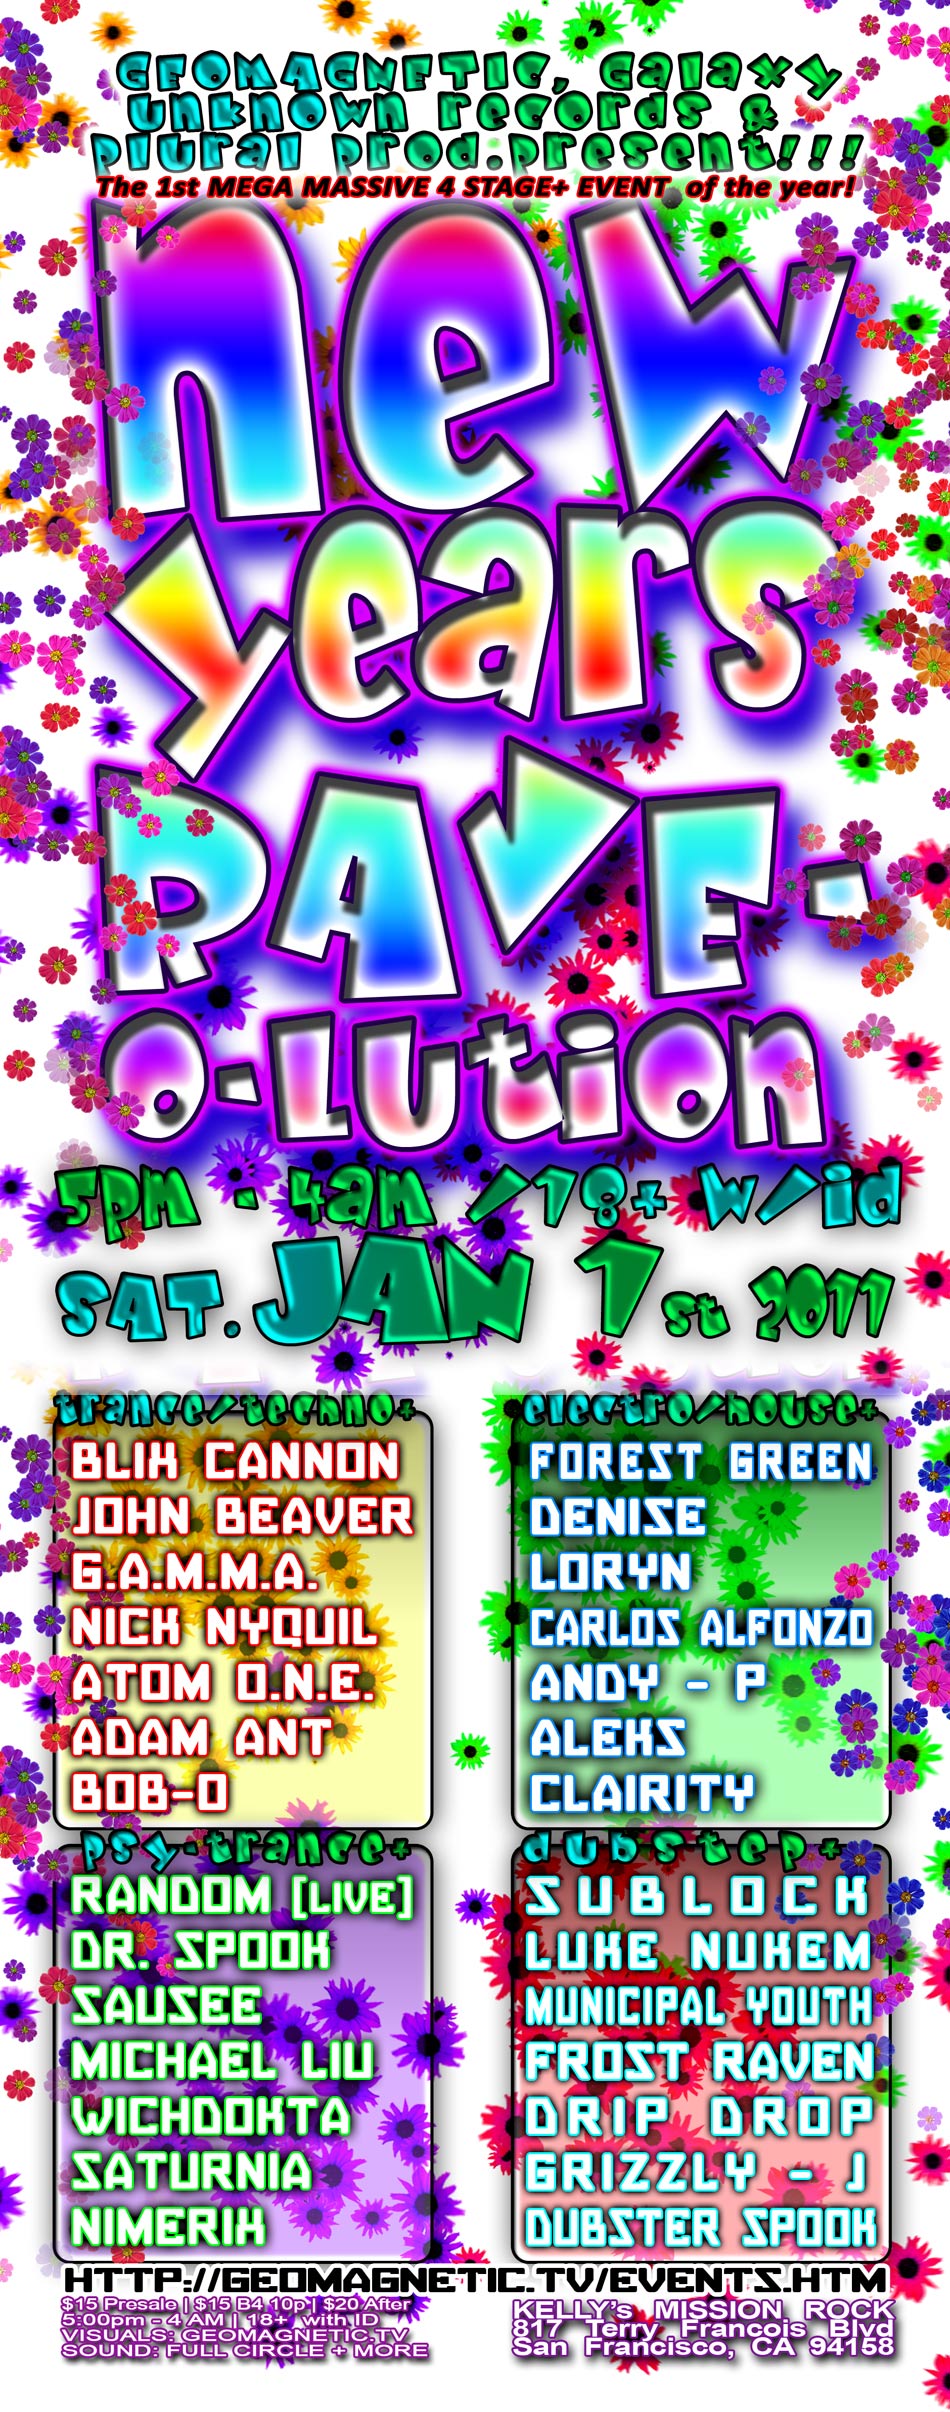 EVENTS NEW YEARS RAVEOLUTION 4 Stage Massive New